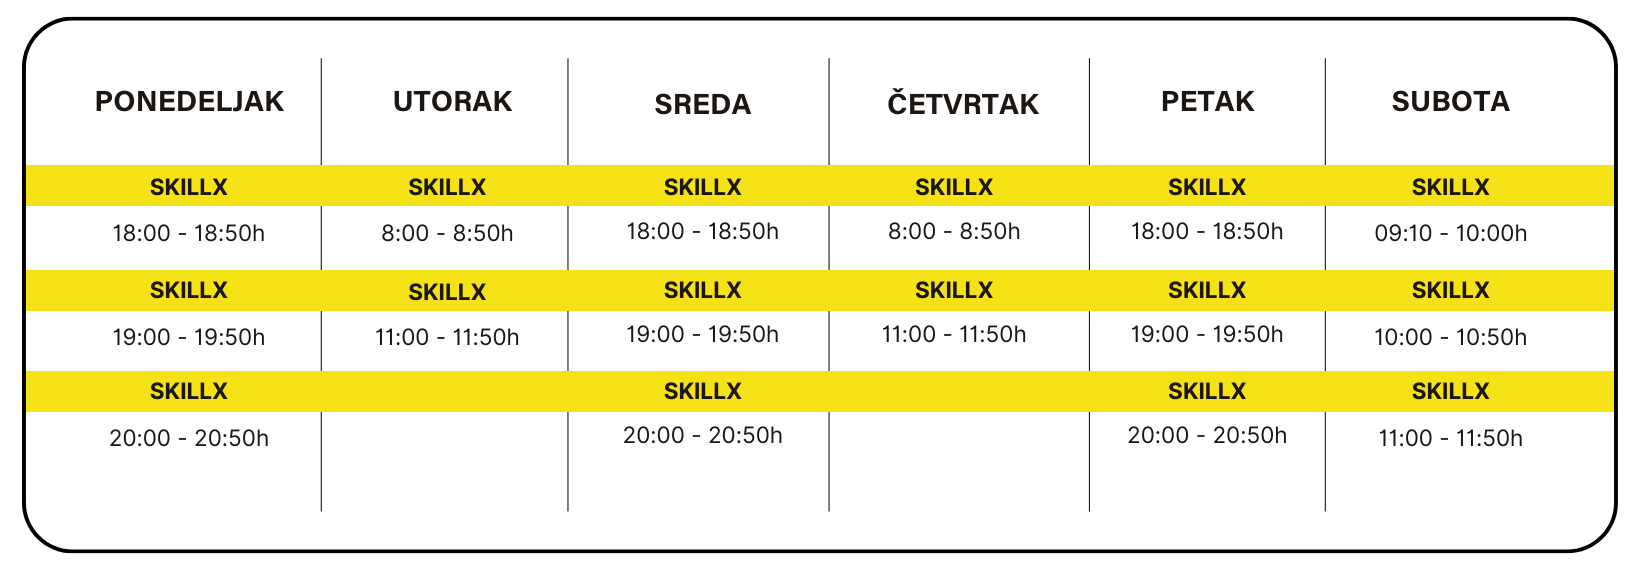 SkillX Class Schedule at Sky Experience